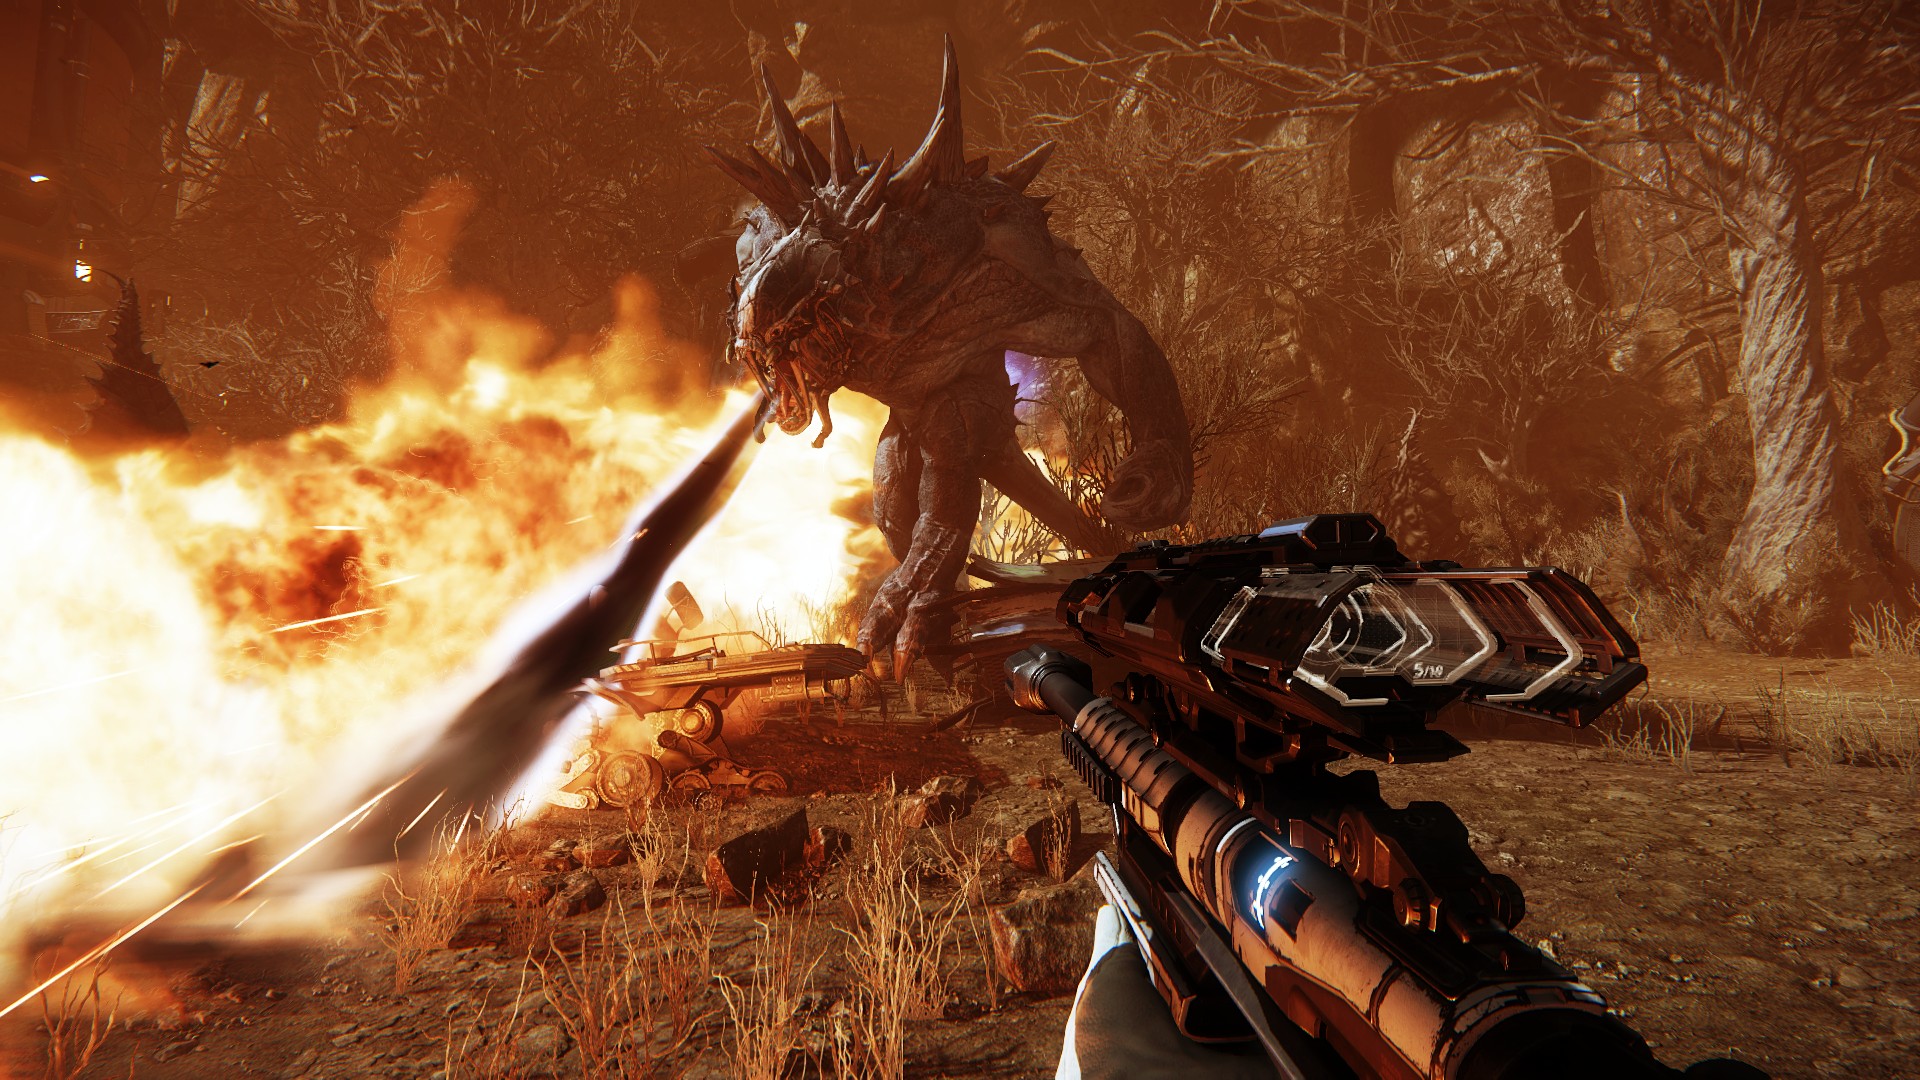 Xbox, PS4, and PC game Evolve promises "evolution" of multiplayer - GameSpot